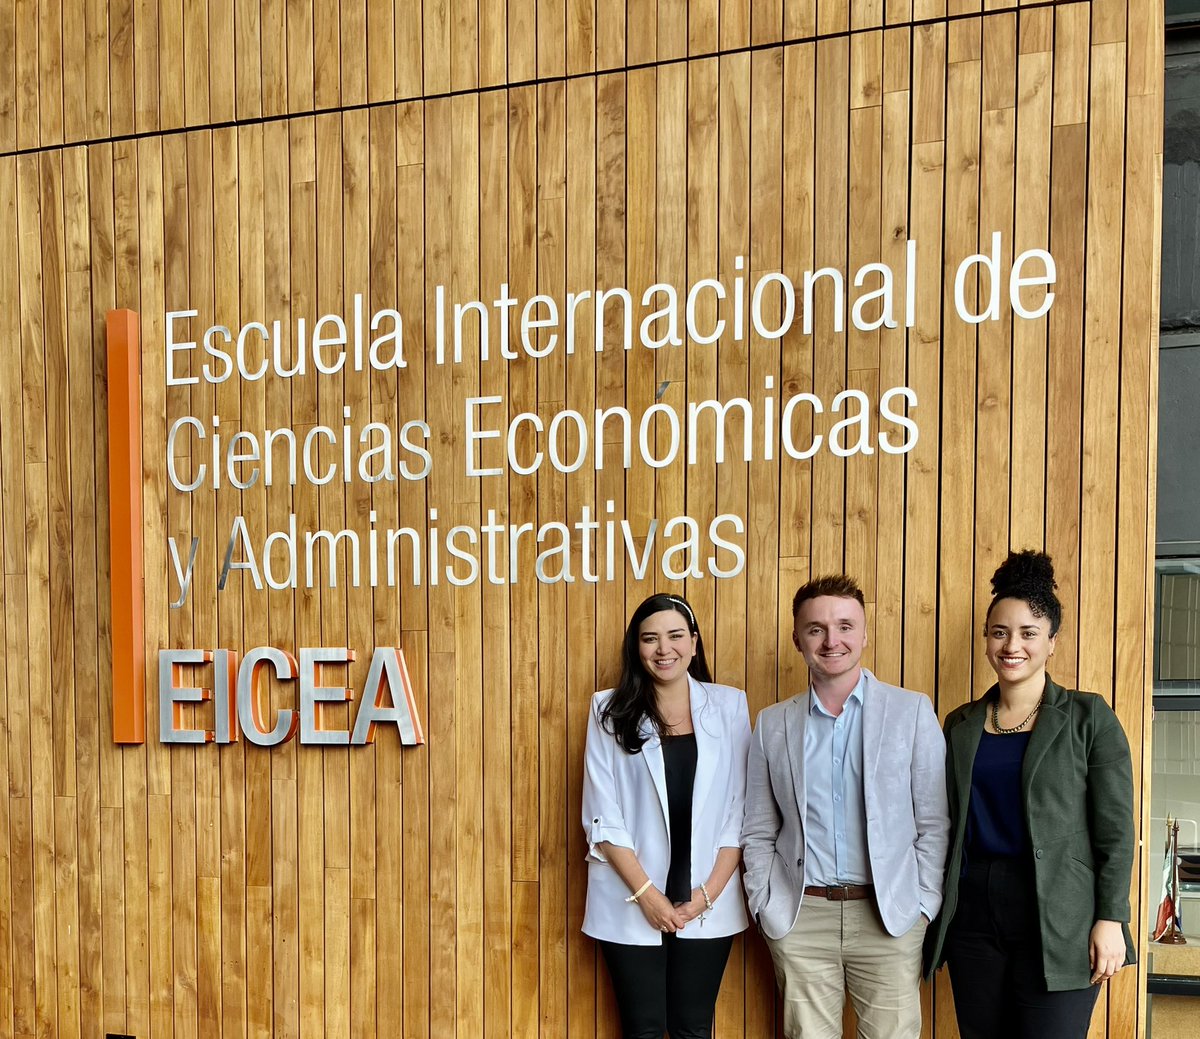 Final meeting in Bogotá 🇨🇴 wrapped up with our close partner @UniSabana @EICEA - a new chapter begins as we finalise our agreement to provide La Sabana students with opportunities to join to our @hubsonline and @daimhulluni programmes.